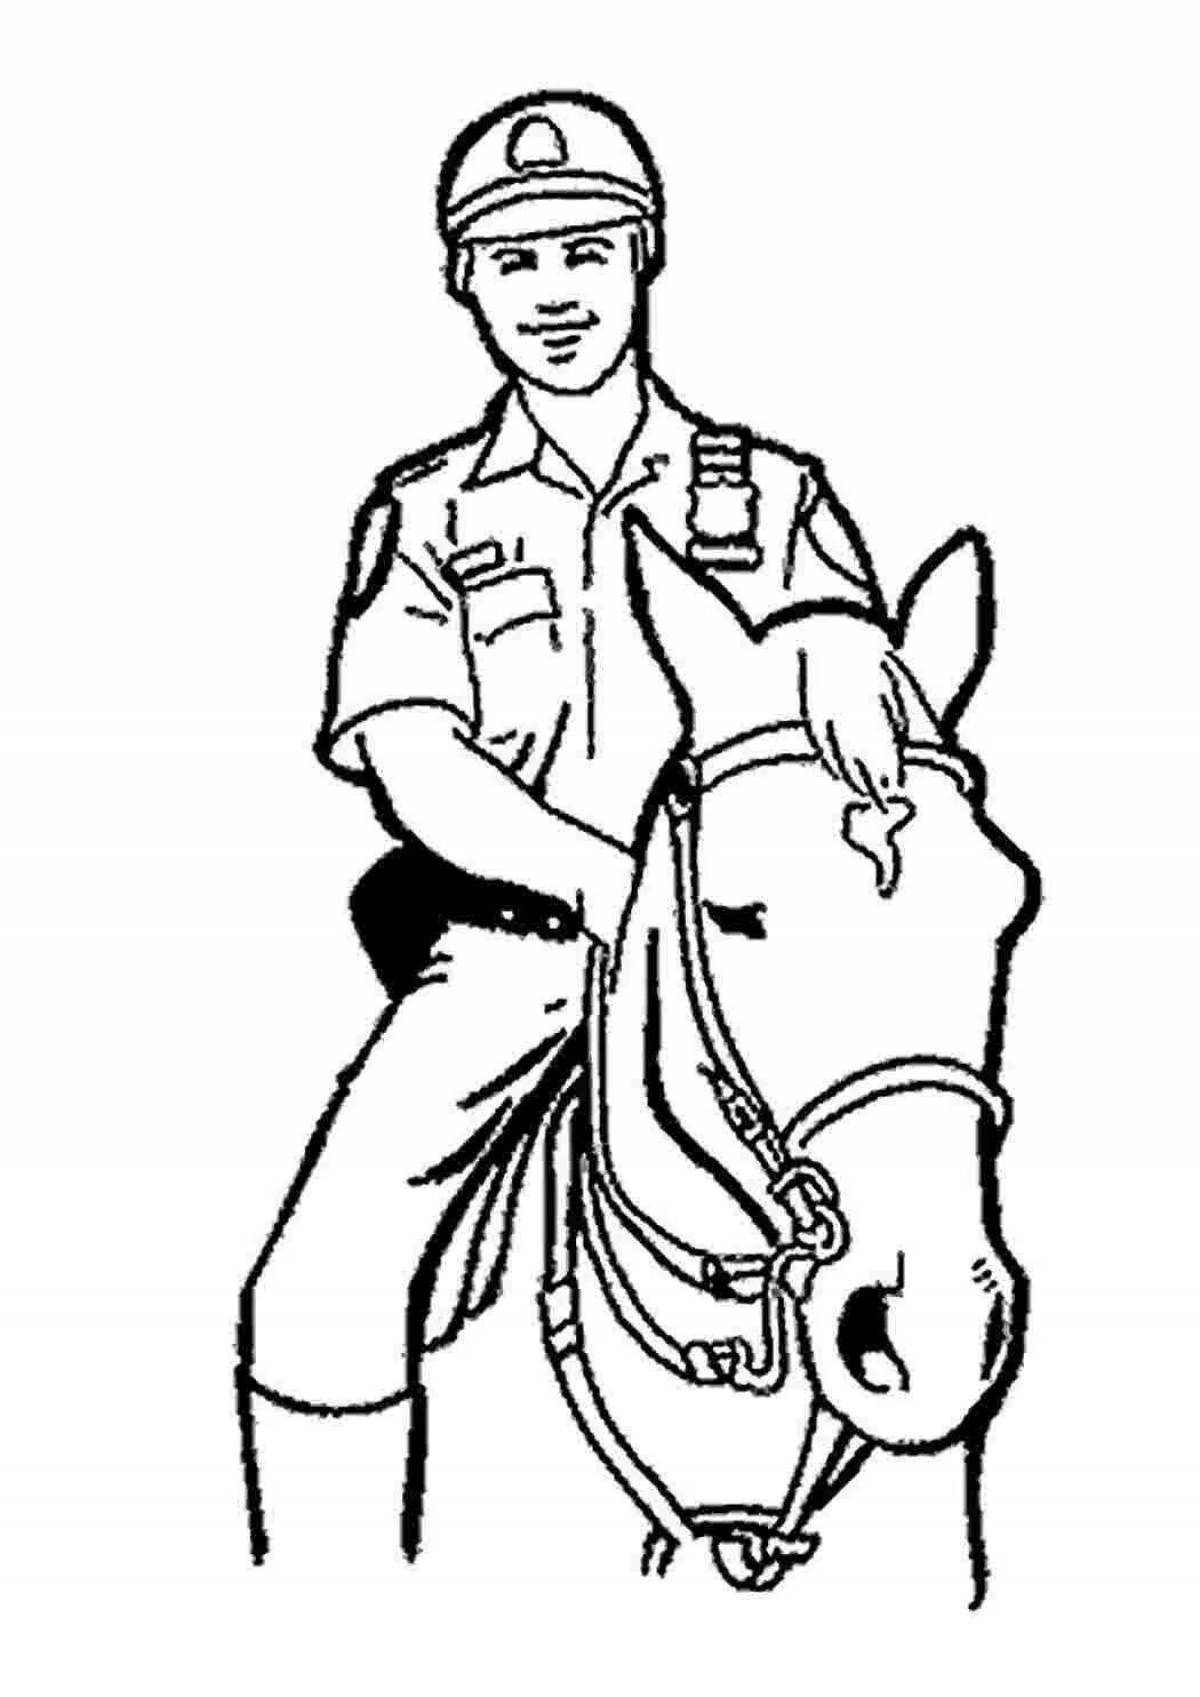 Cop Animated Coloring Page